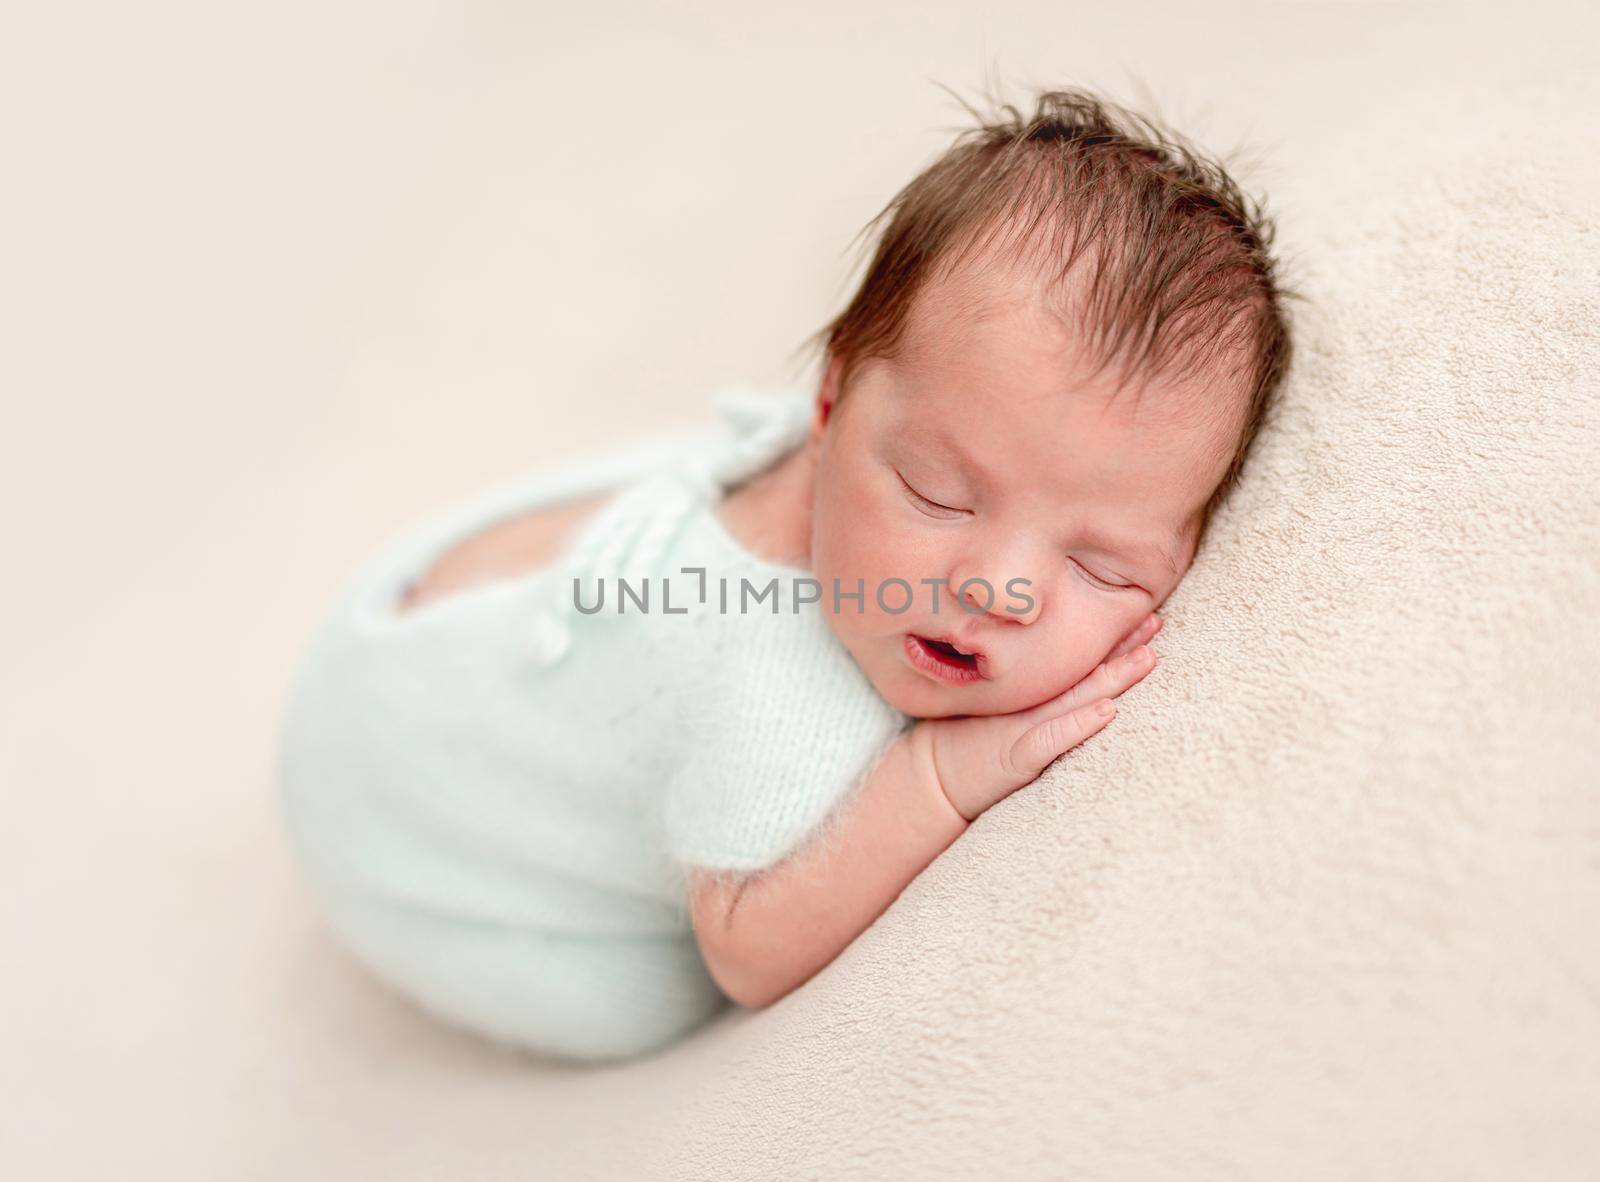 Innocent newborn angel in white knitted suit